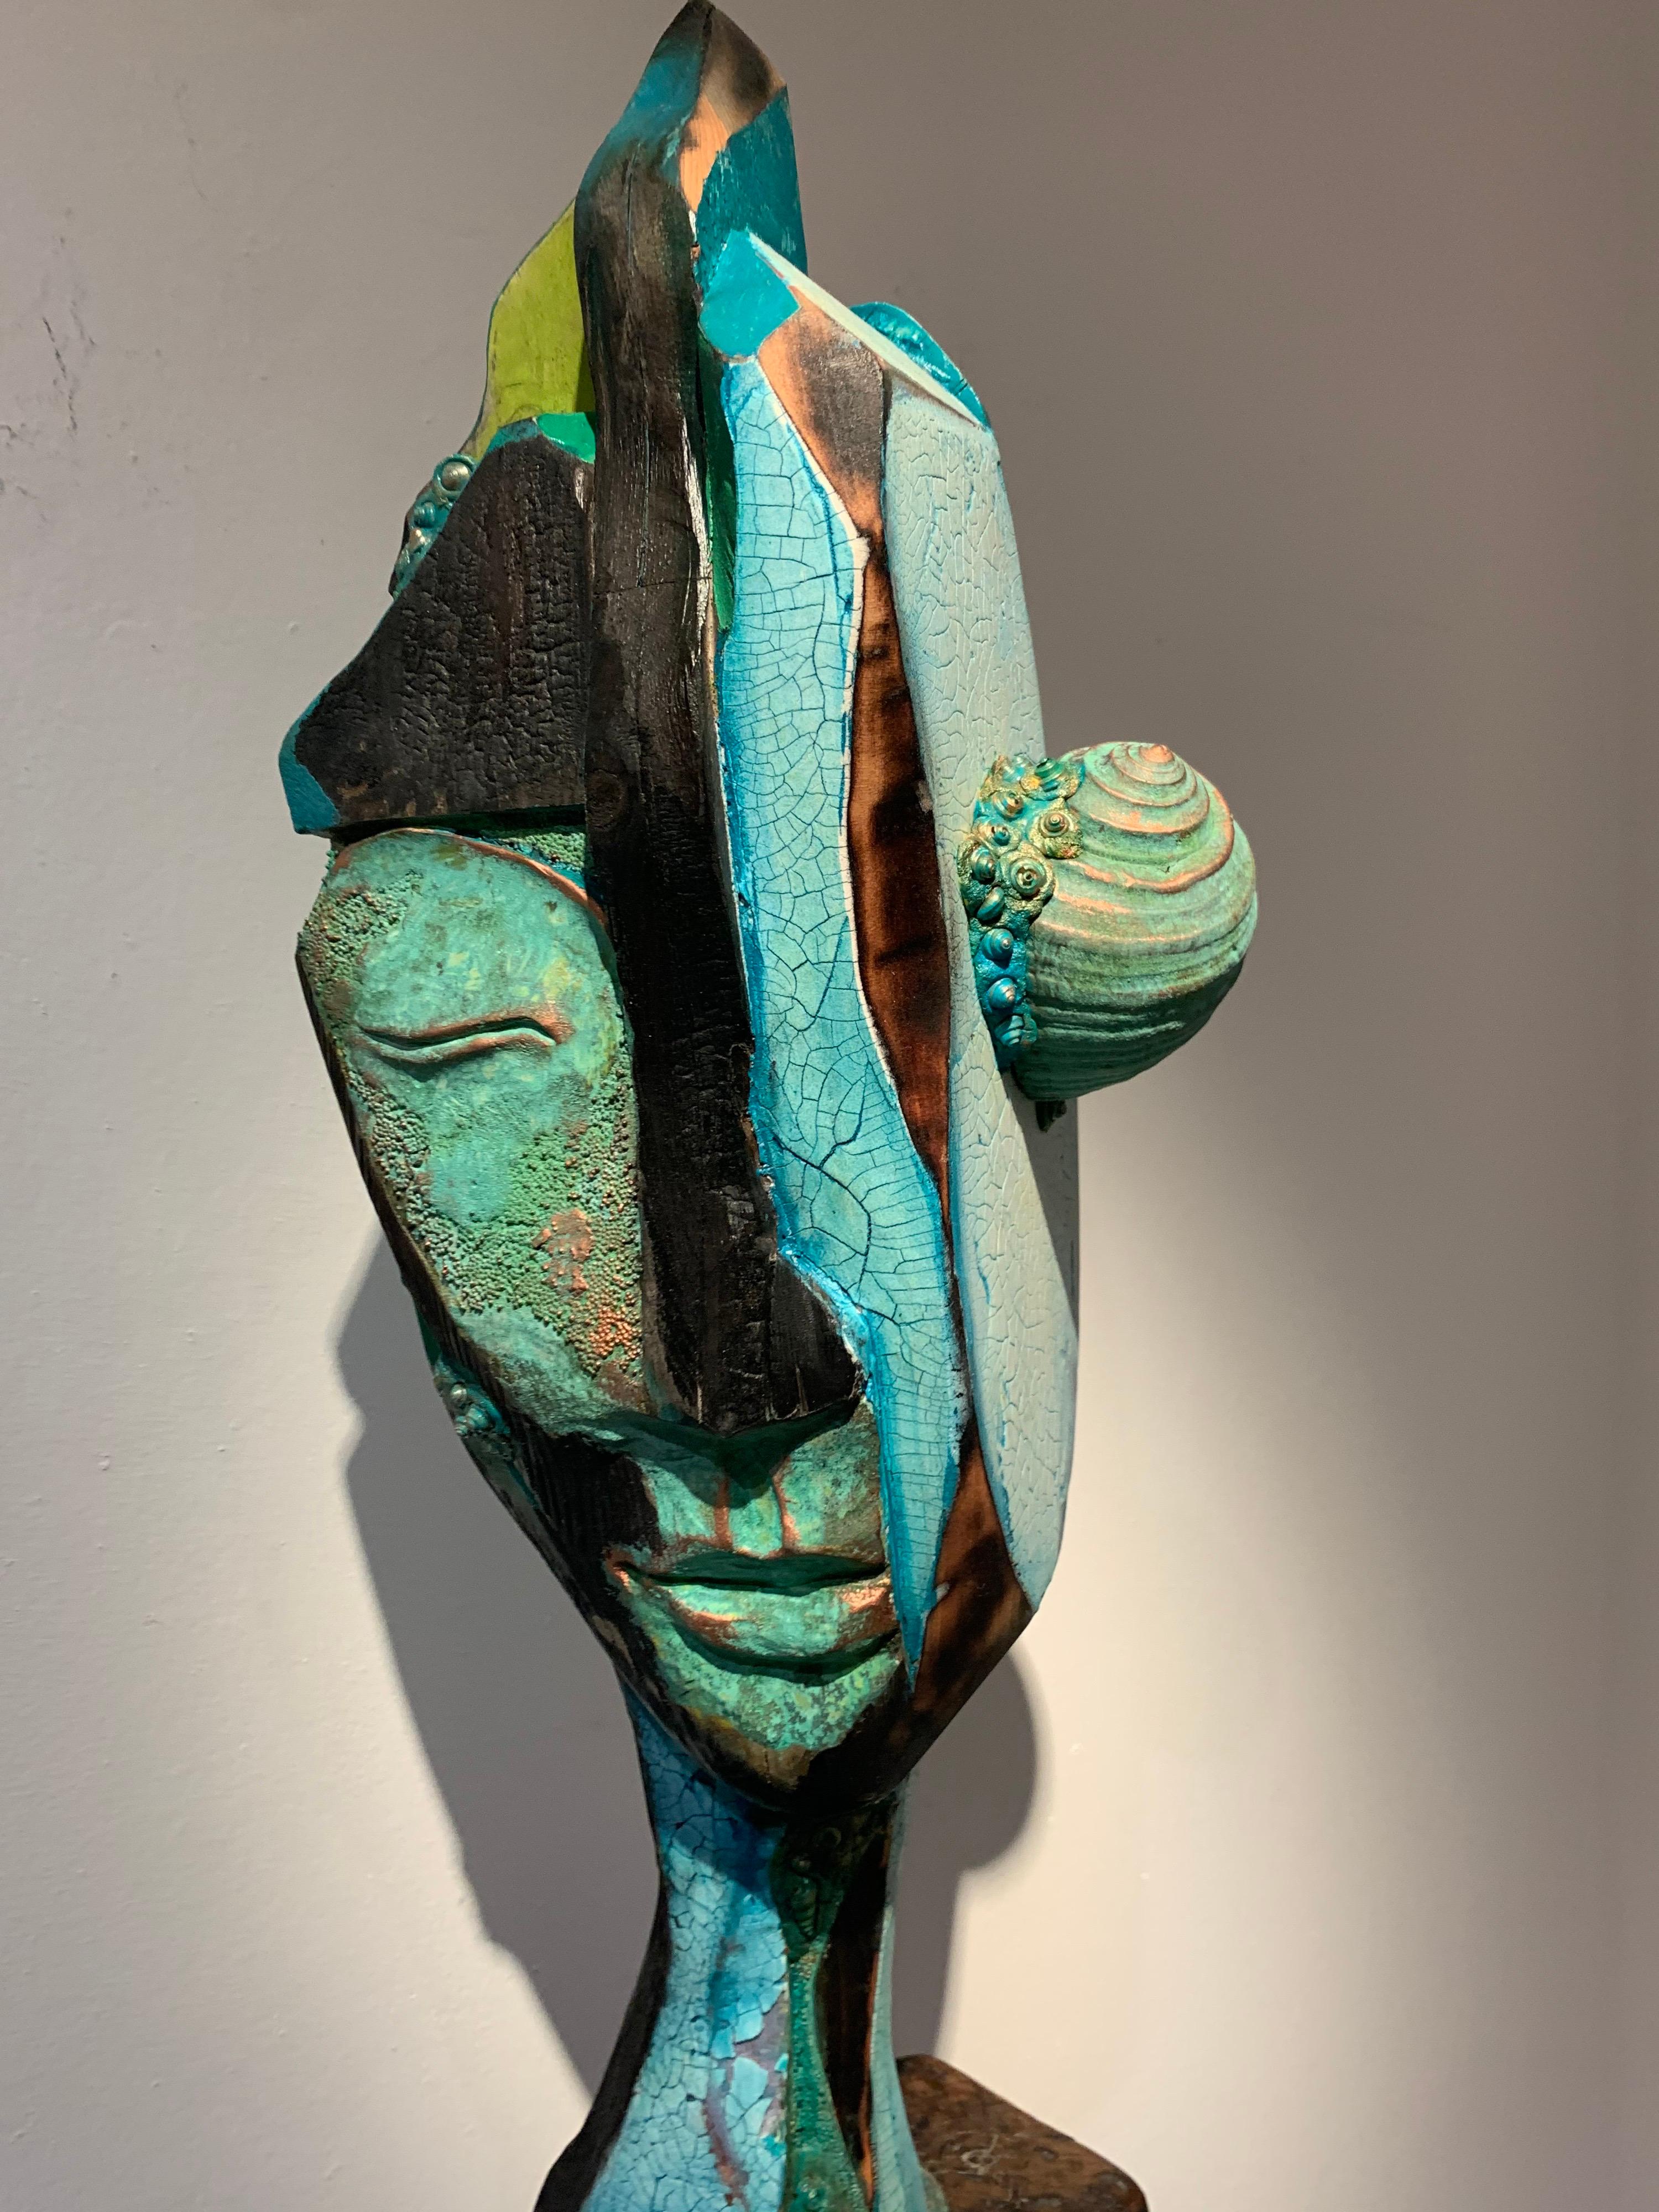 Listening, wood, acrylic, mixed media sculpture, green, blue, off white, brown 6